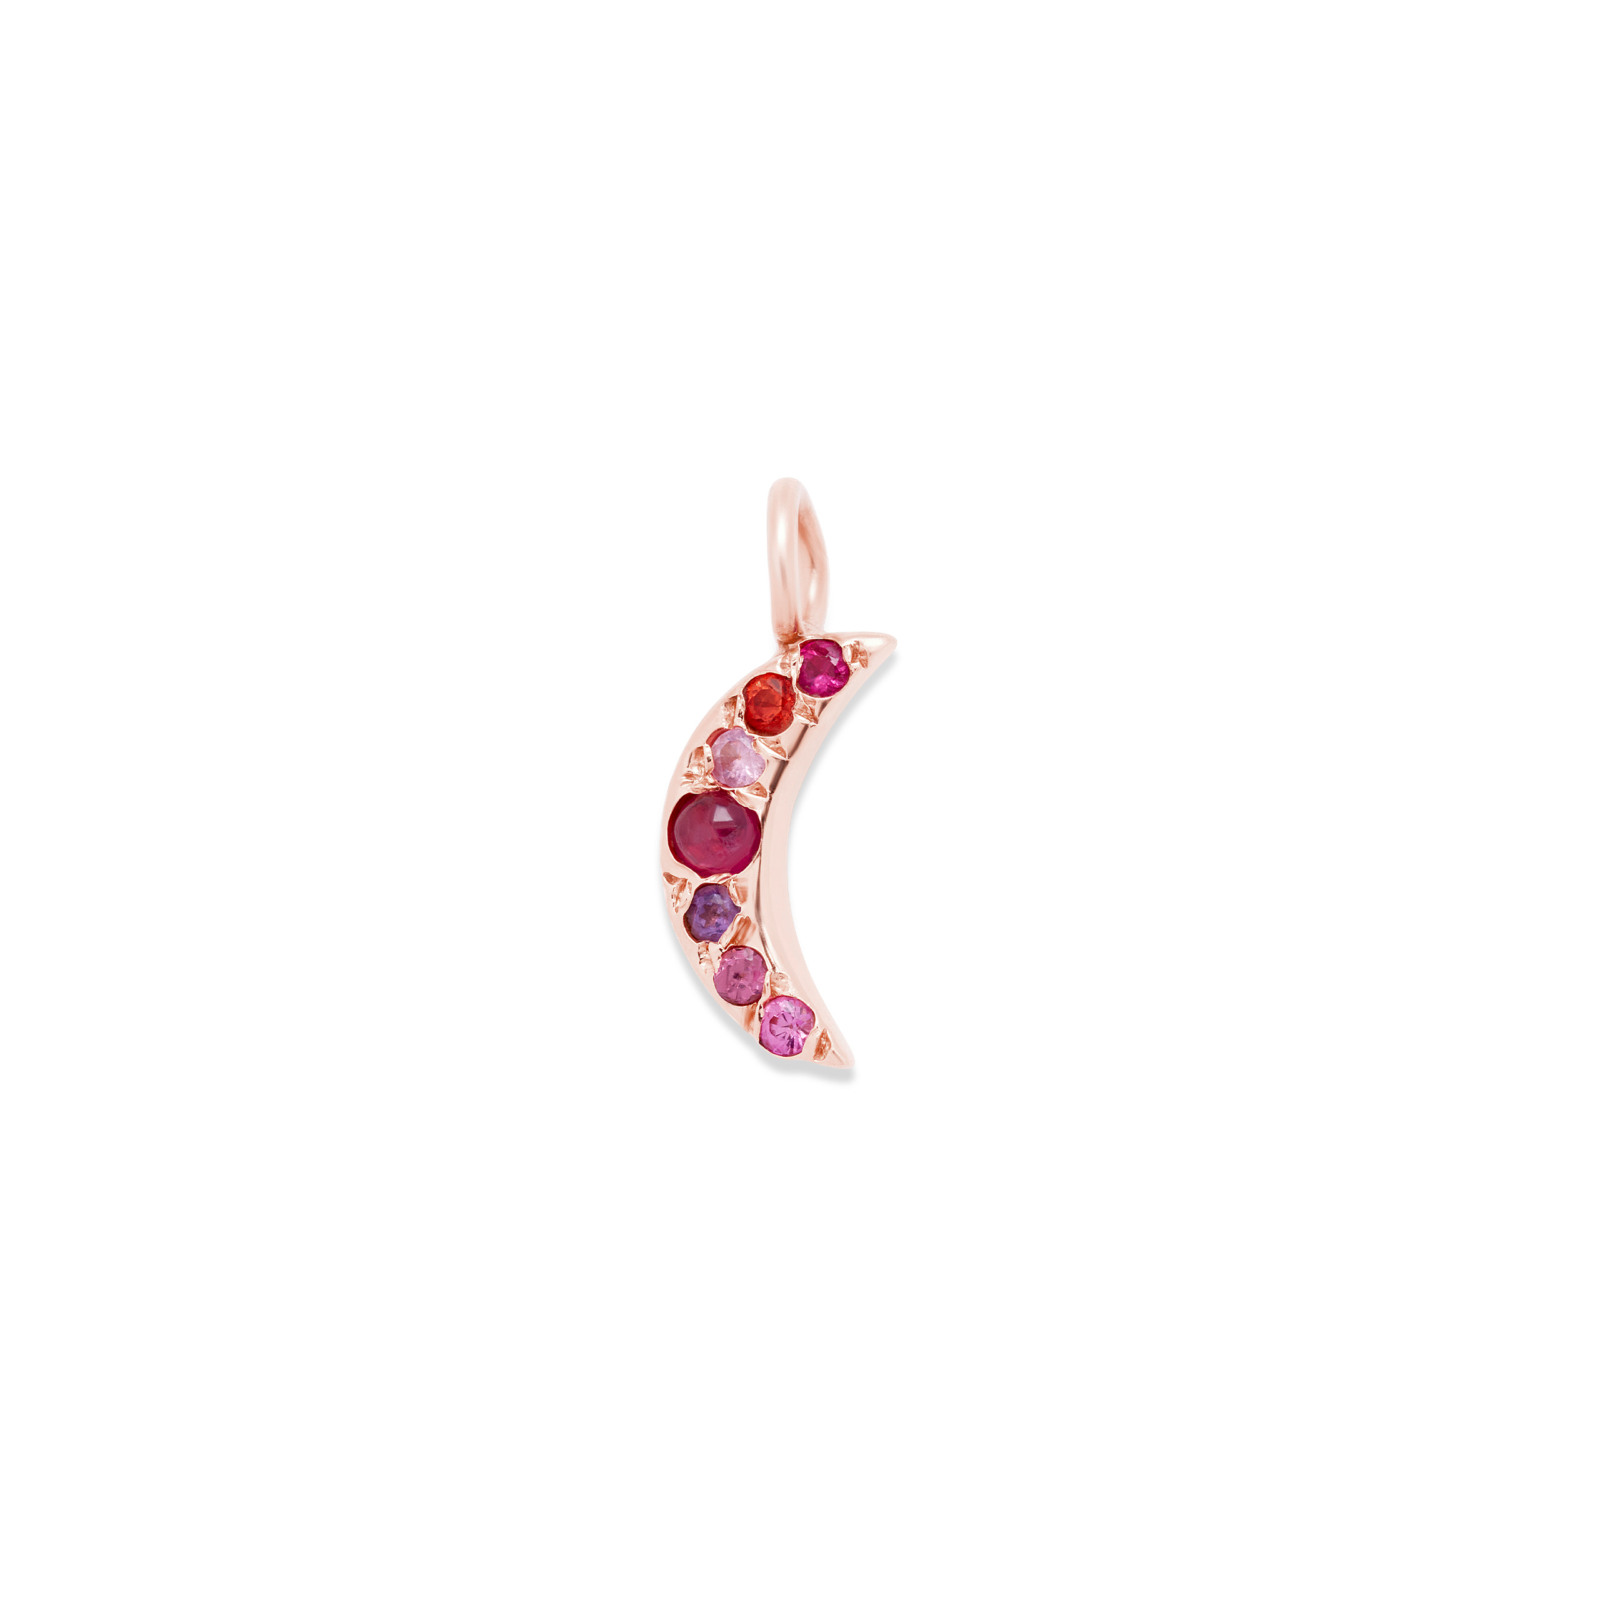 moon charm necklace in 14k pink gold with diamonds and gemstones